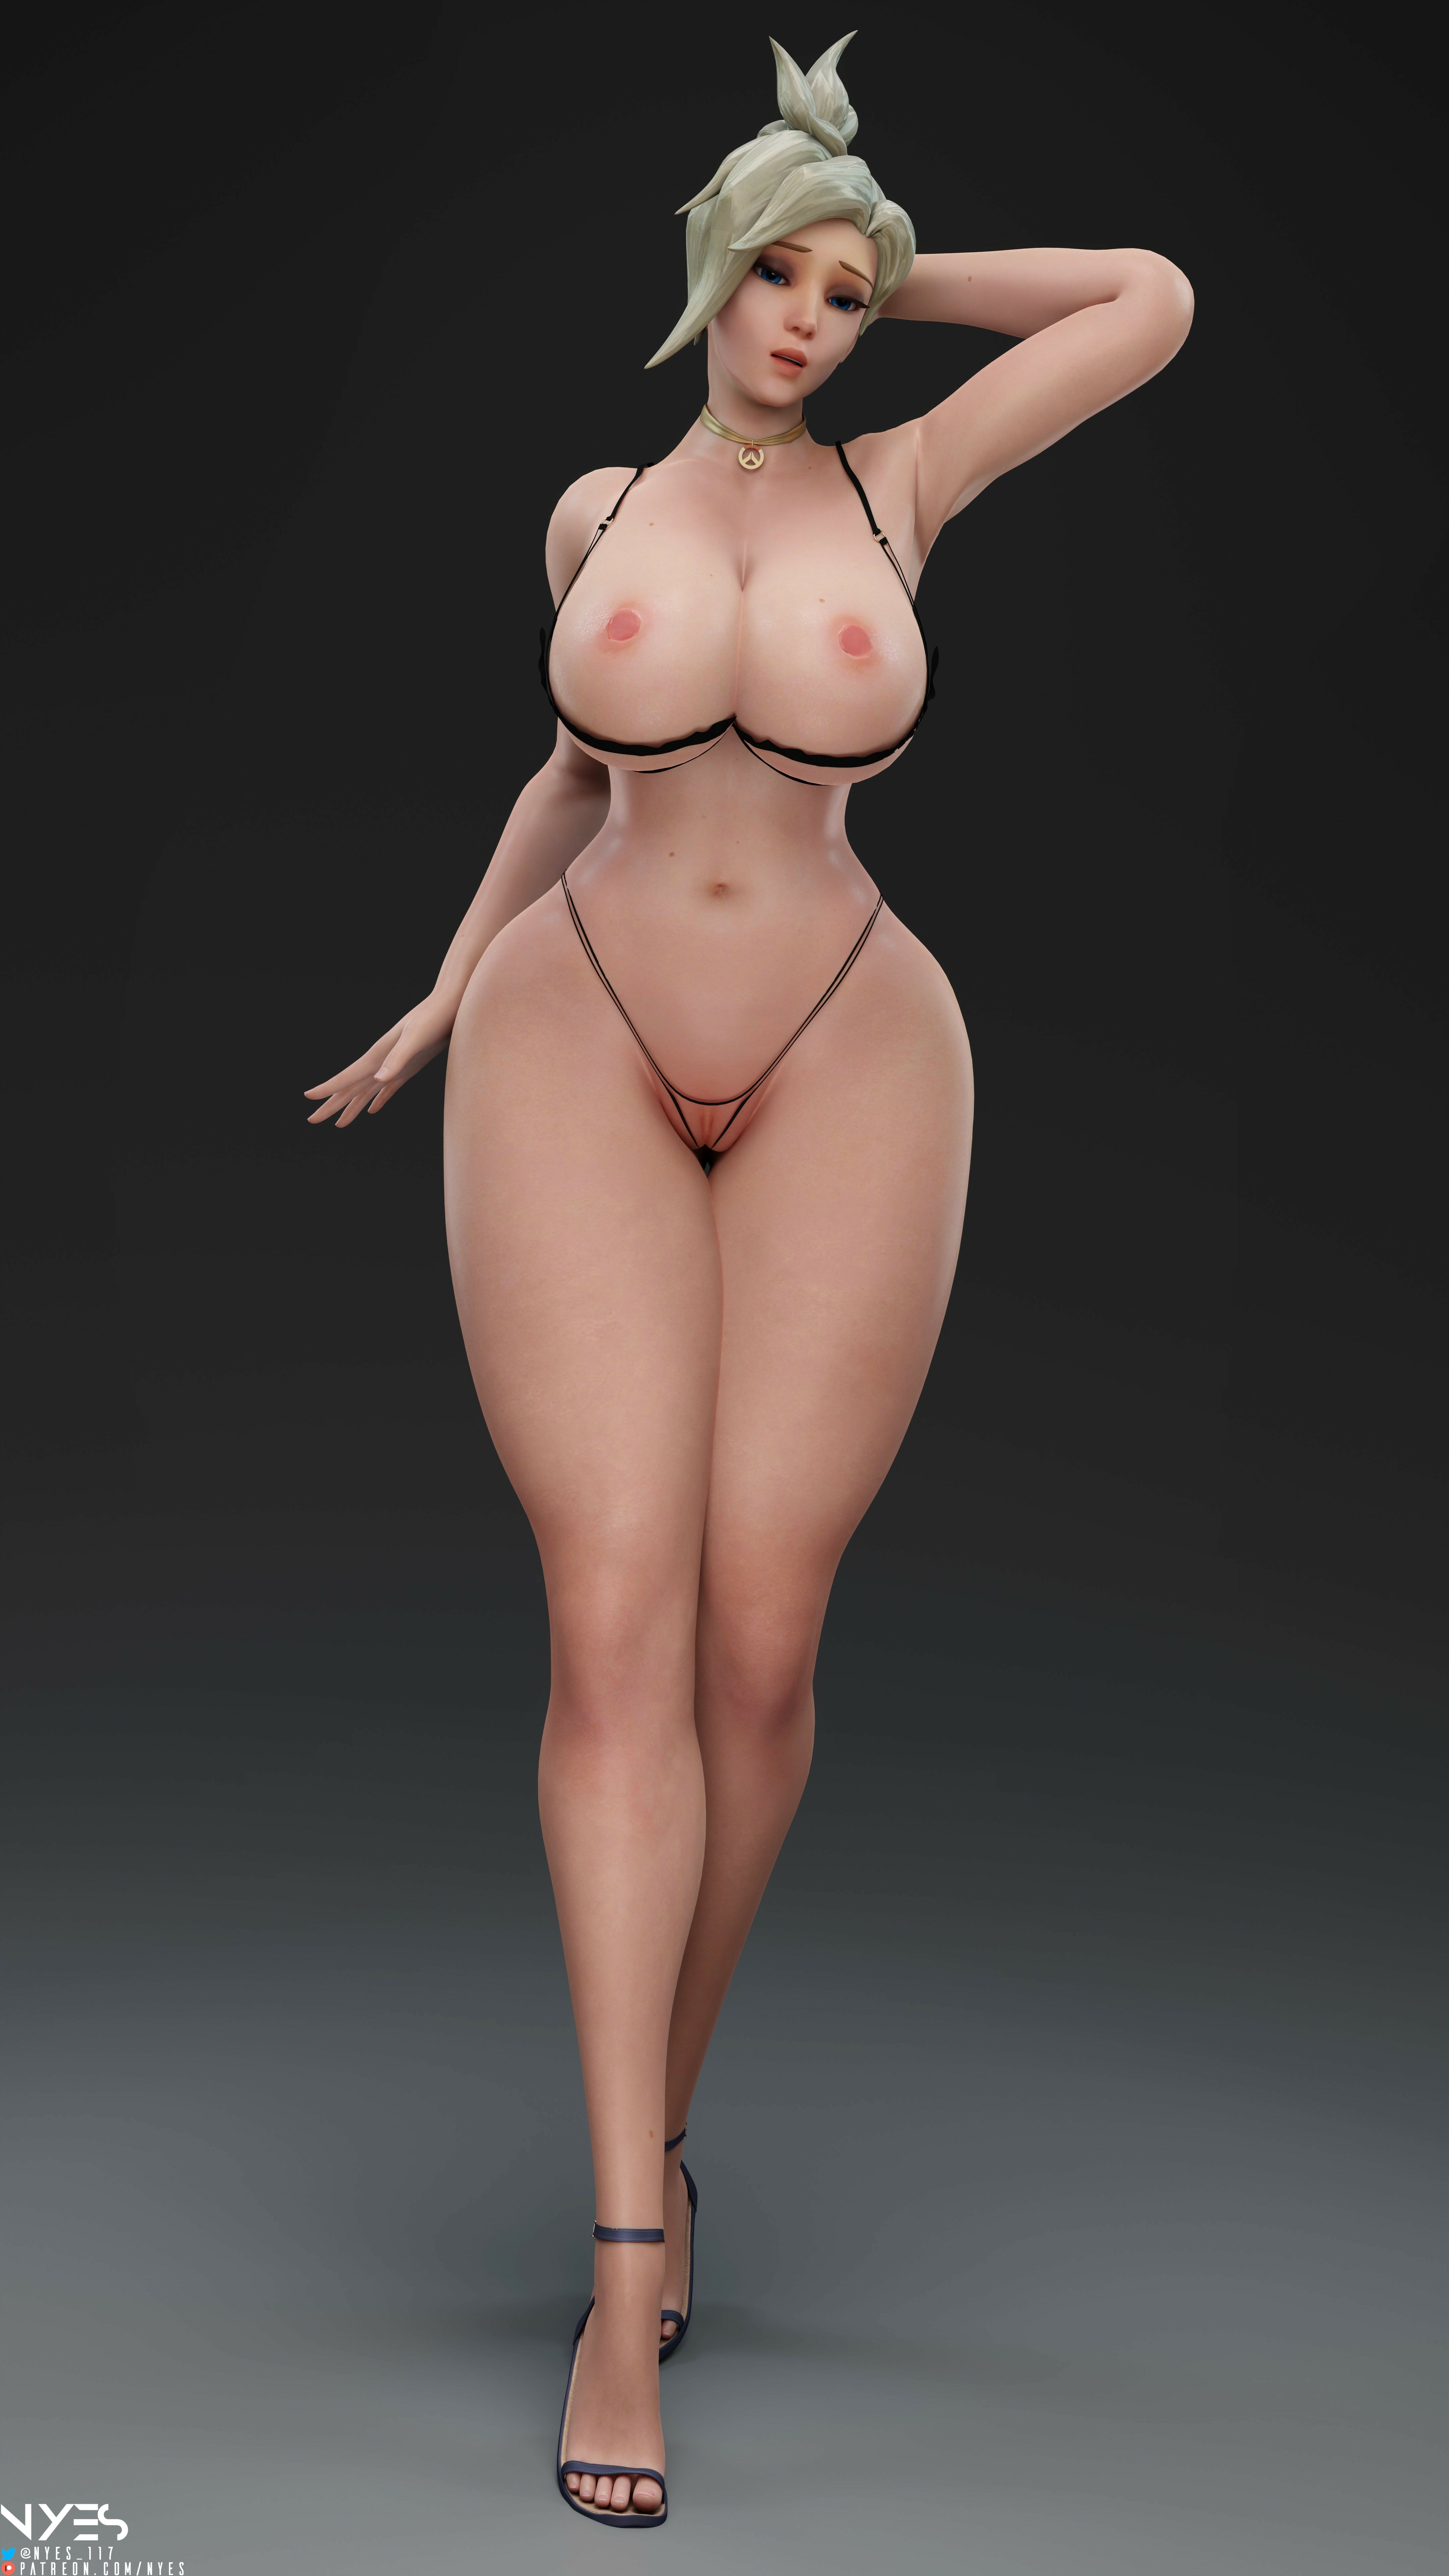 Mercy (8K) Mercy Overwatch Partially_clothed Big Tits Thick Thighs See Through Big Ass Pose Lingerie 3d Porn Pinup